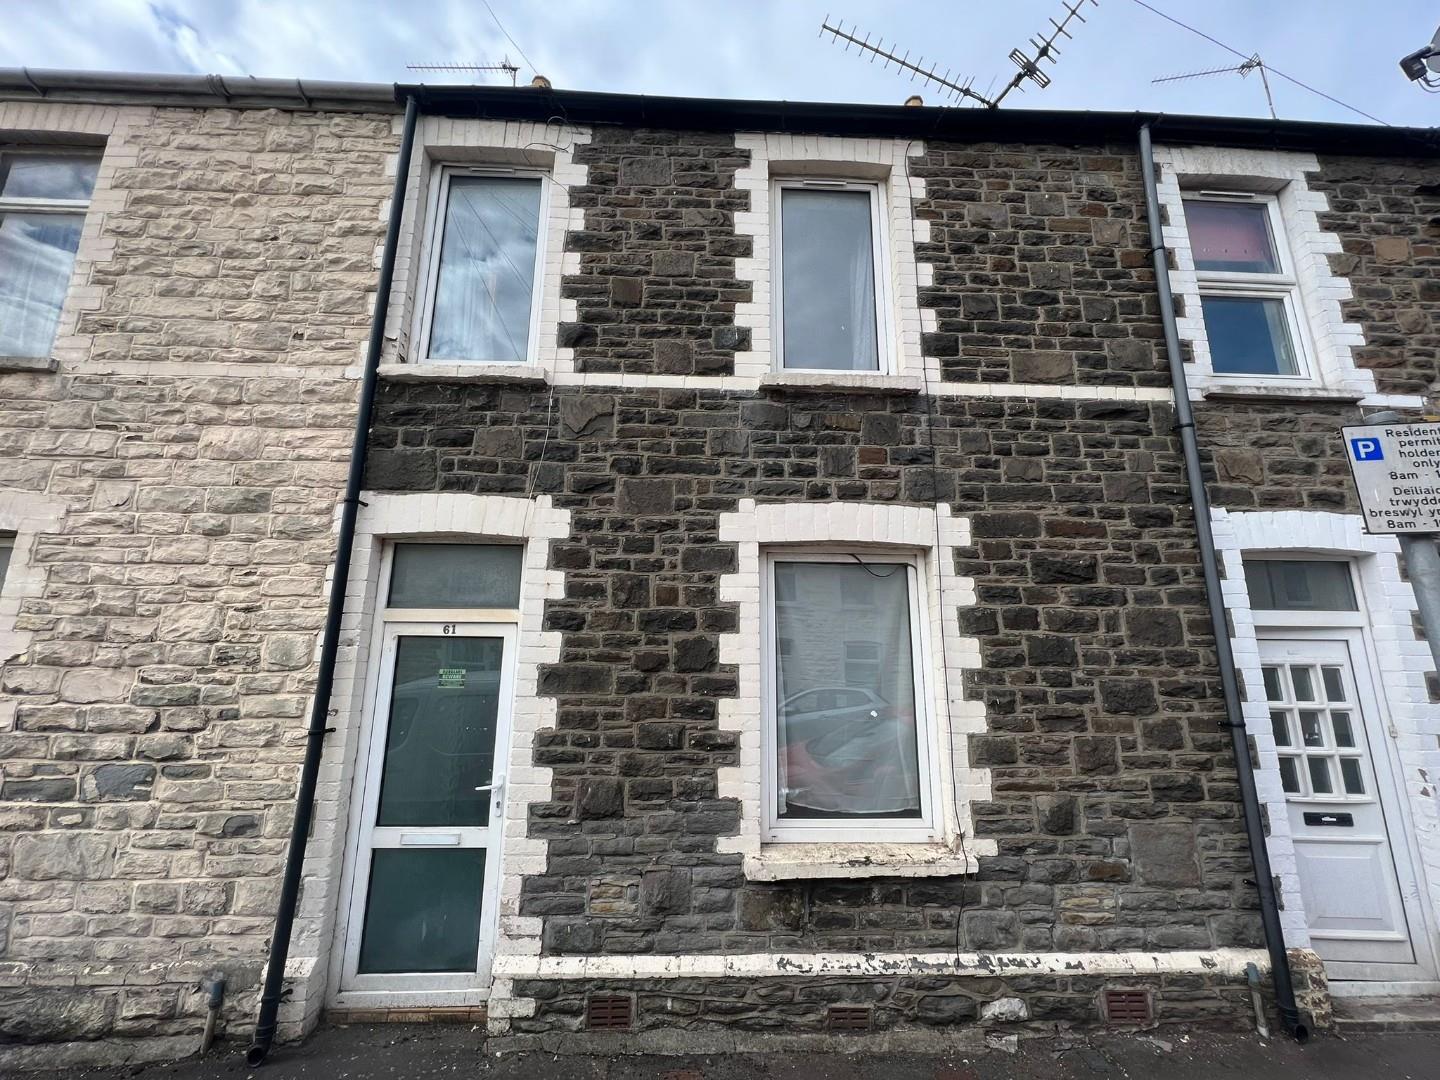 4 bed  to rent in Flora Street, Cardiff, CF24